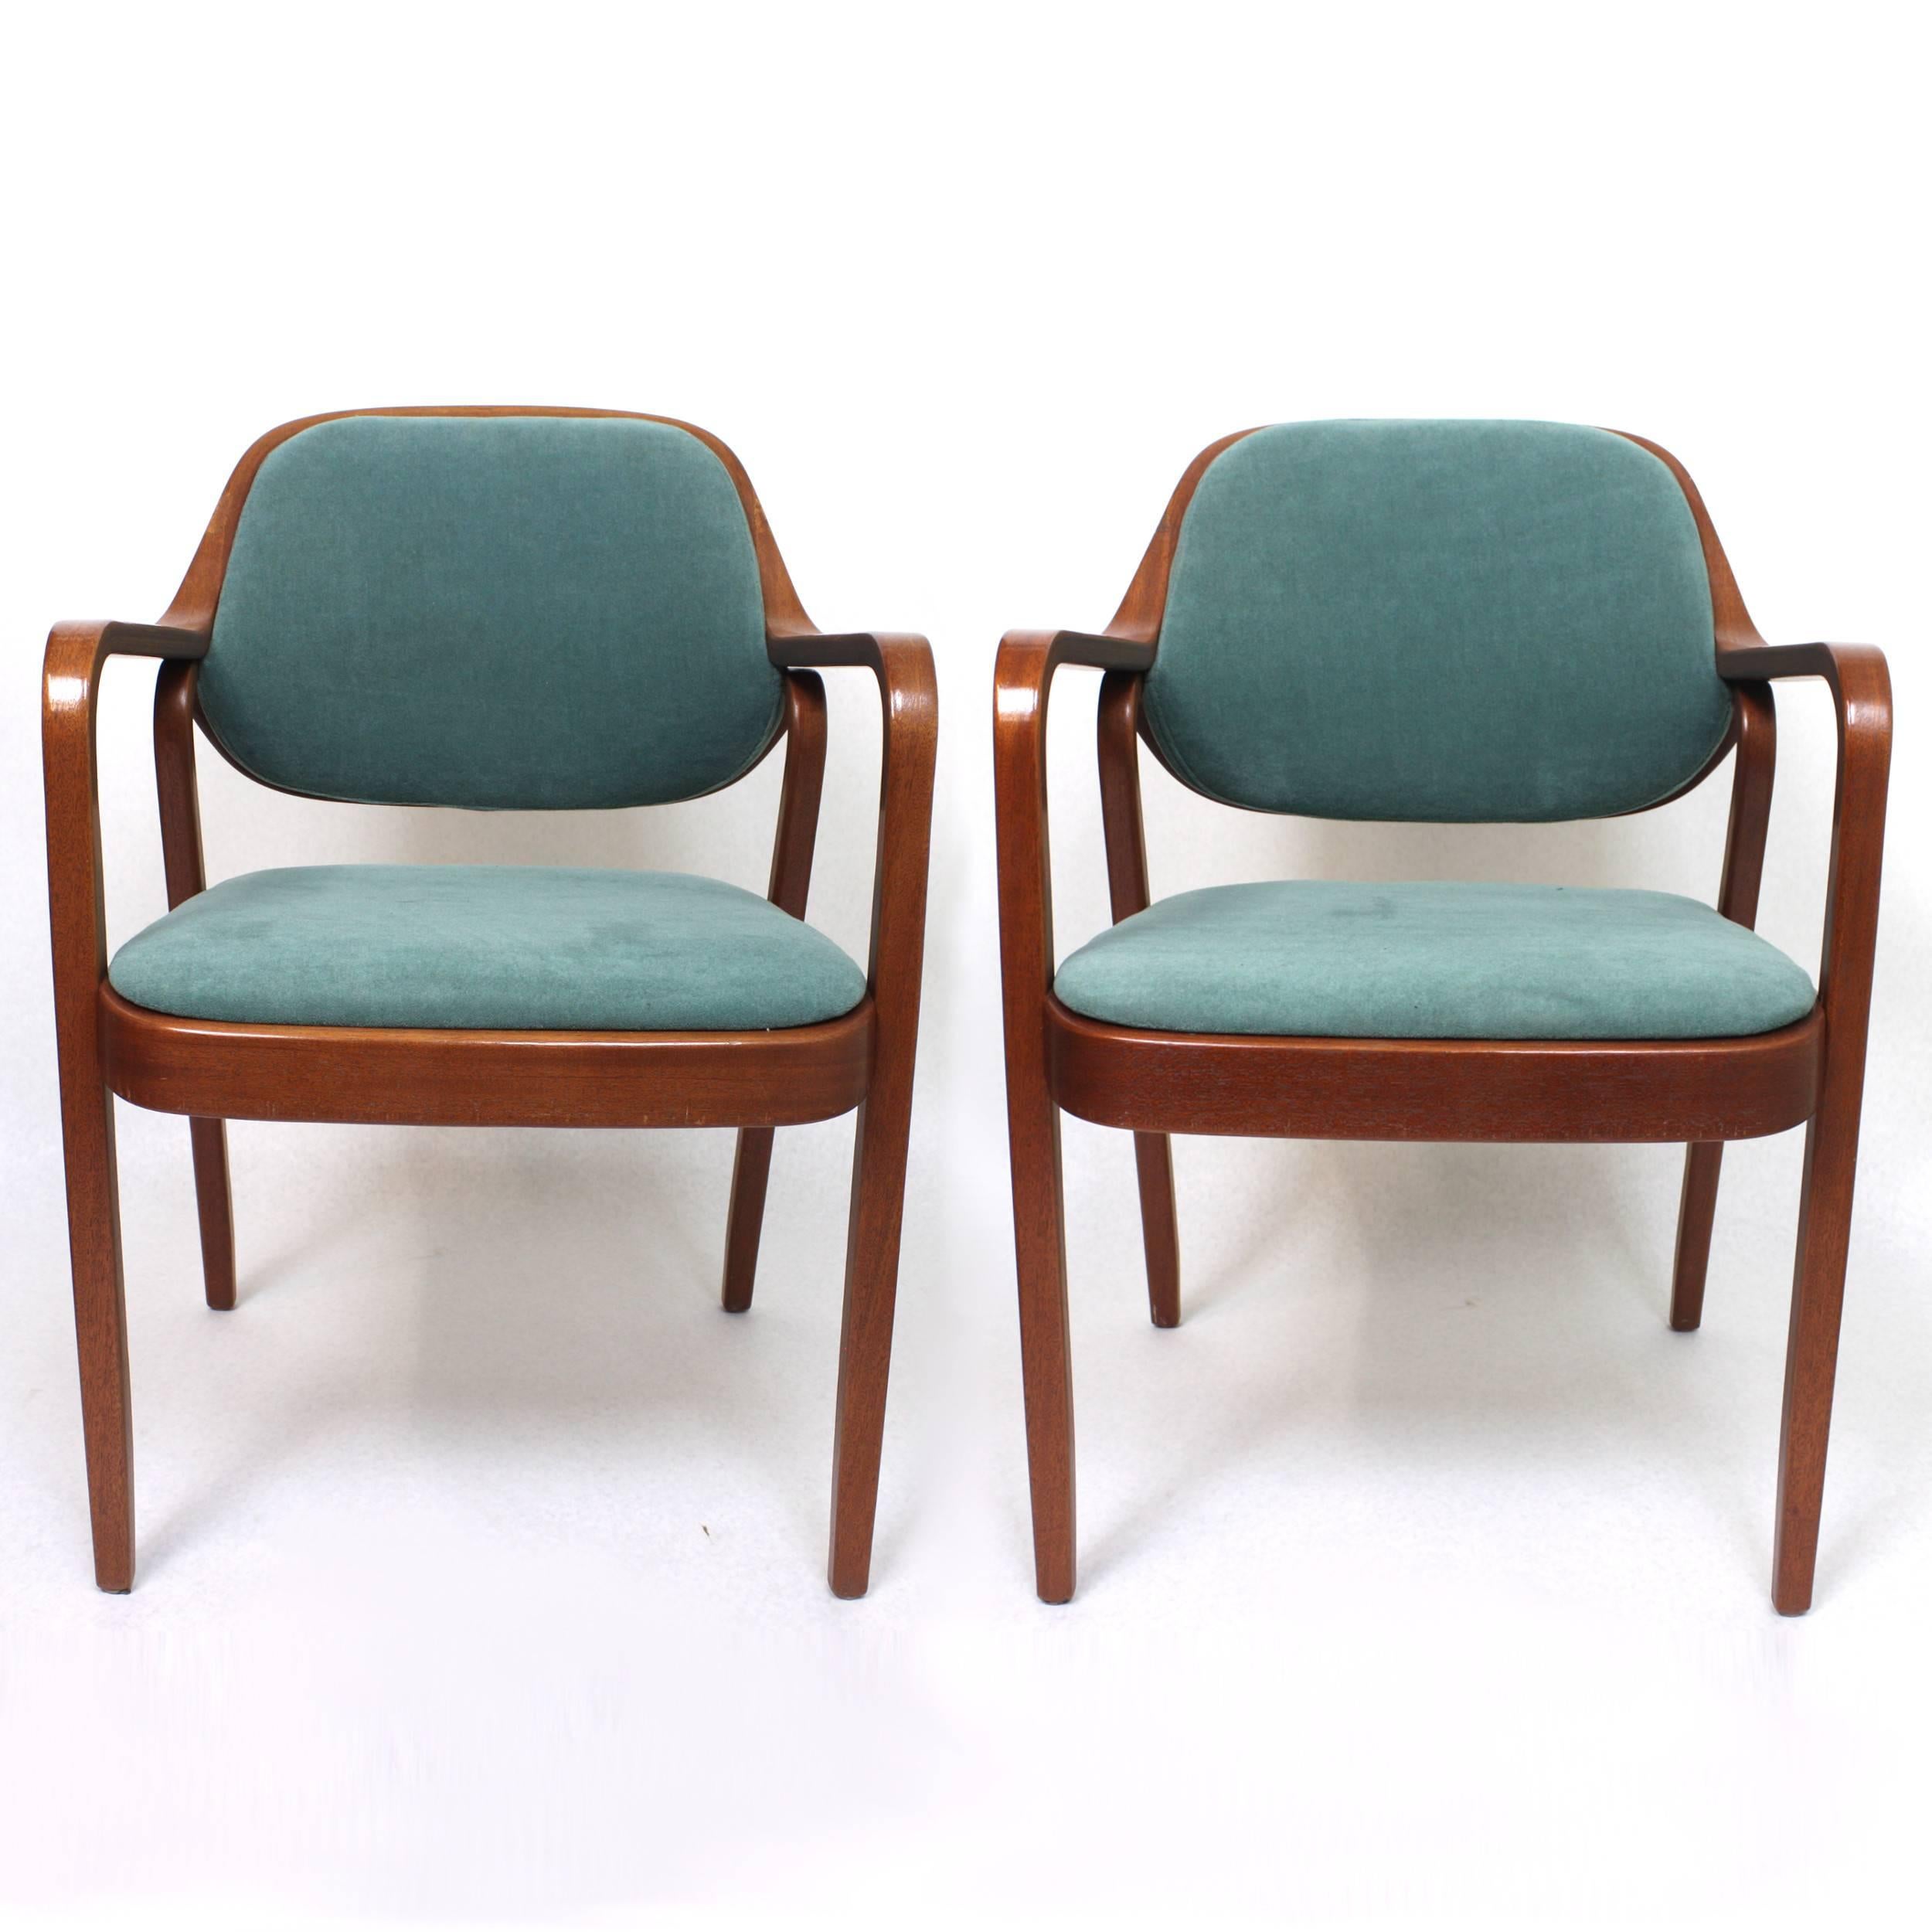 American Pair of Mid-Century Modern Bentwood Mahogany Side Chairs by Don Pettit for Knoll